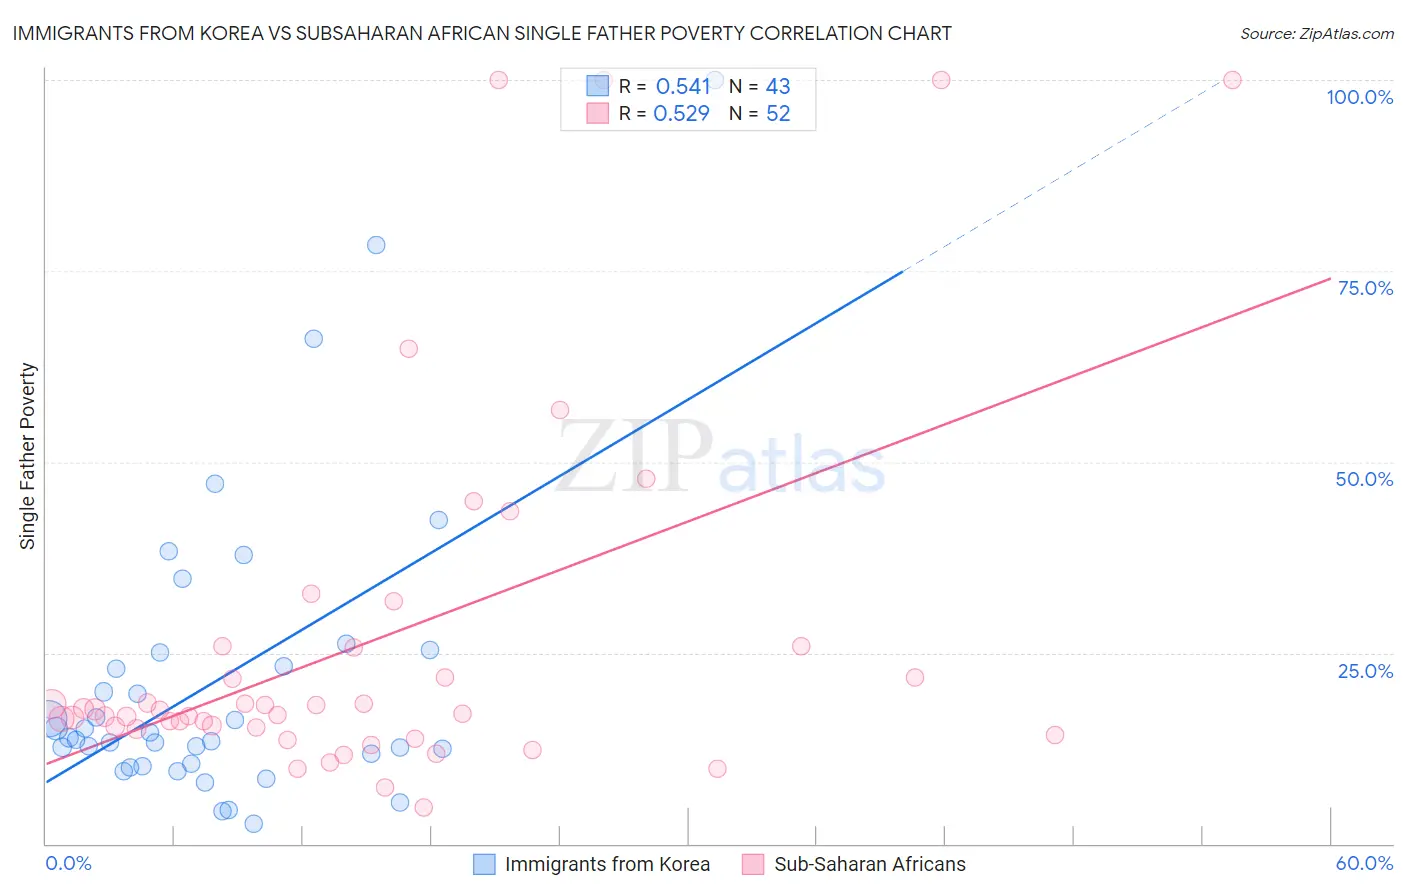 Immigrants from Korea vs Subsaharan African Single Father Poverty